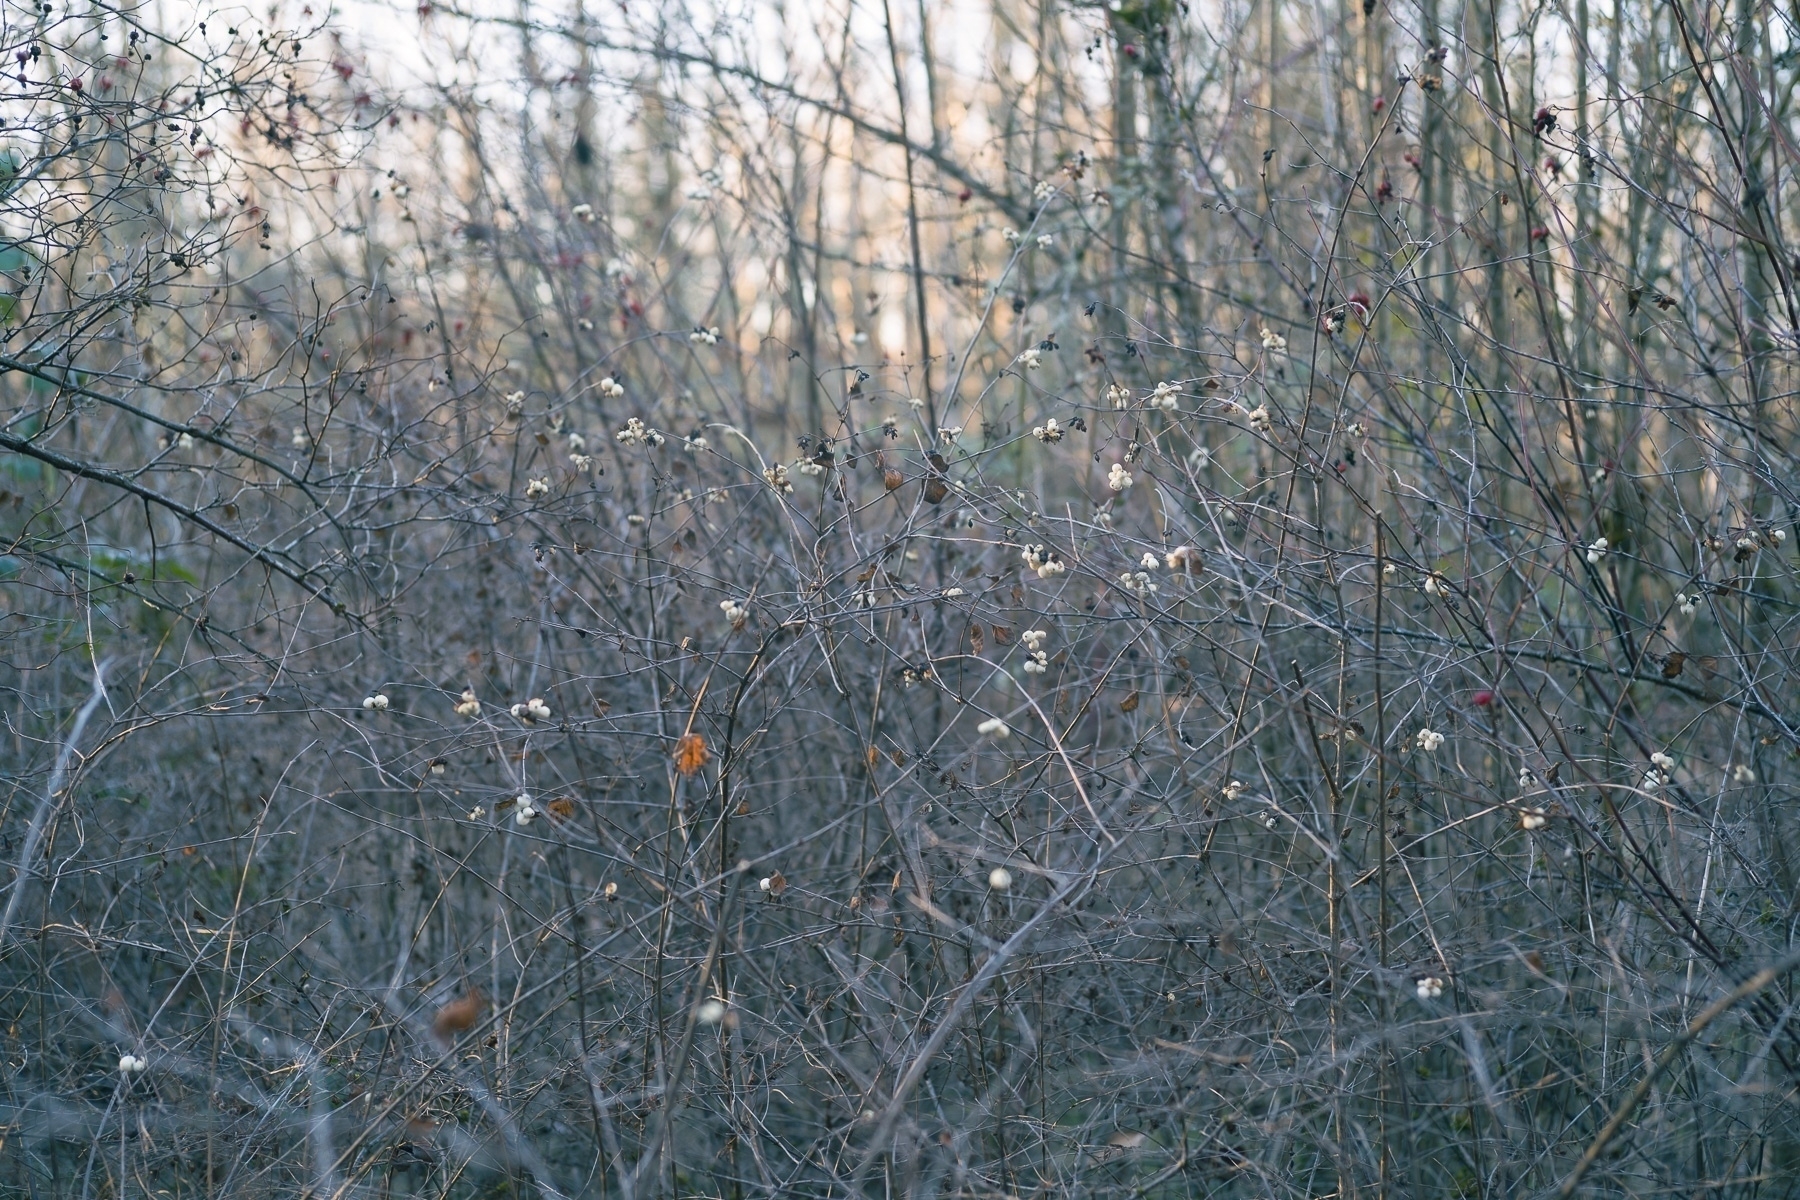 A bush without leaves with white berries of some kind on it  scattered sparsely. Trees in the blurred background.